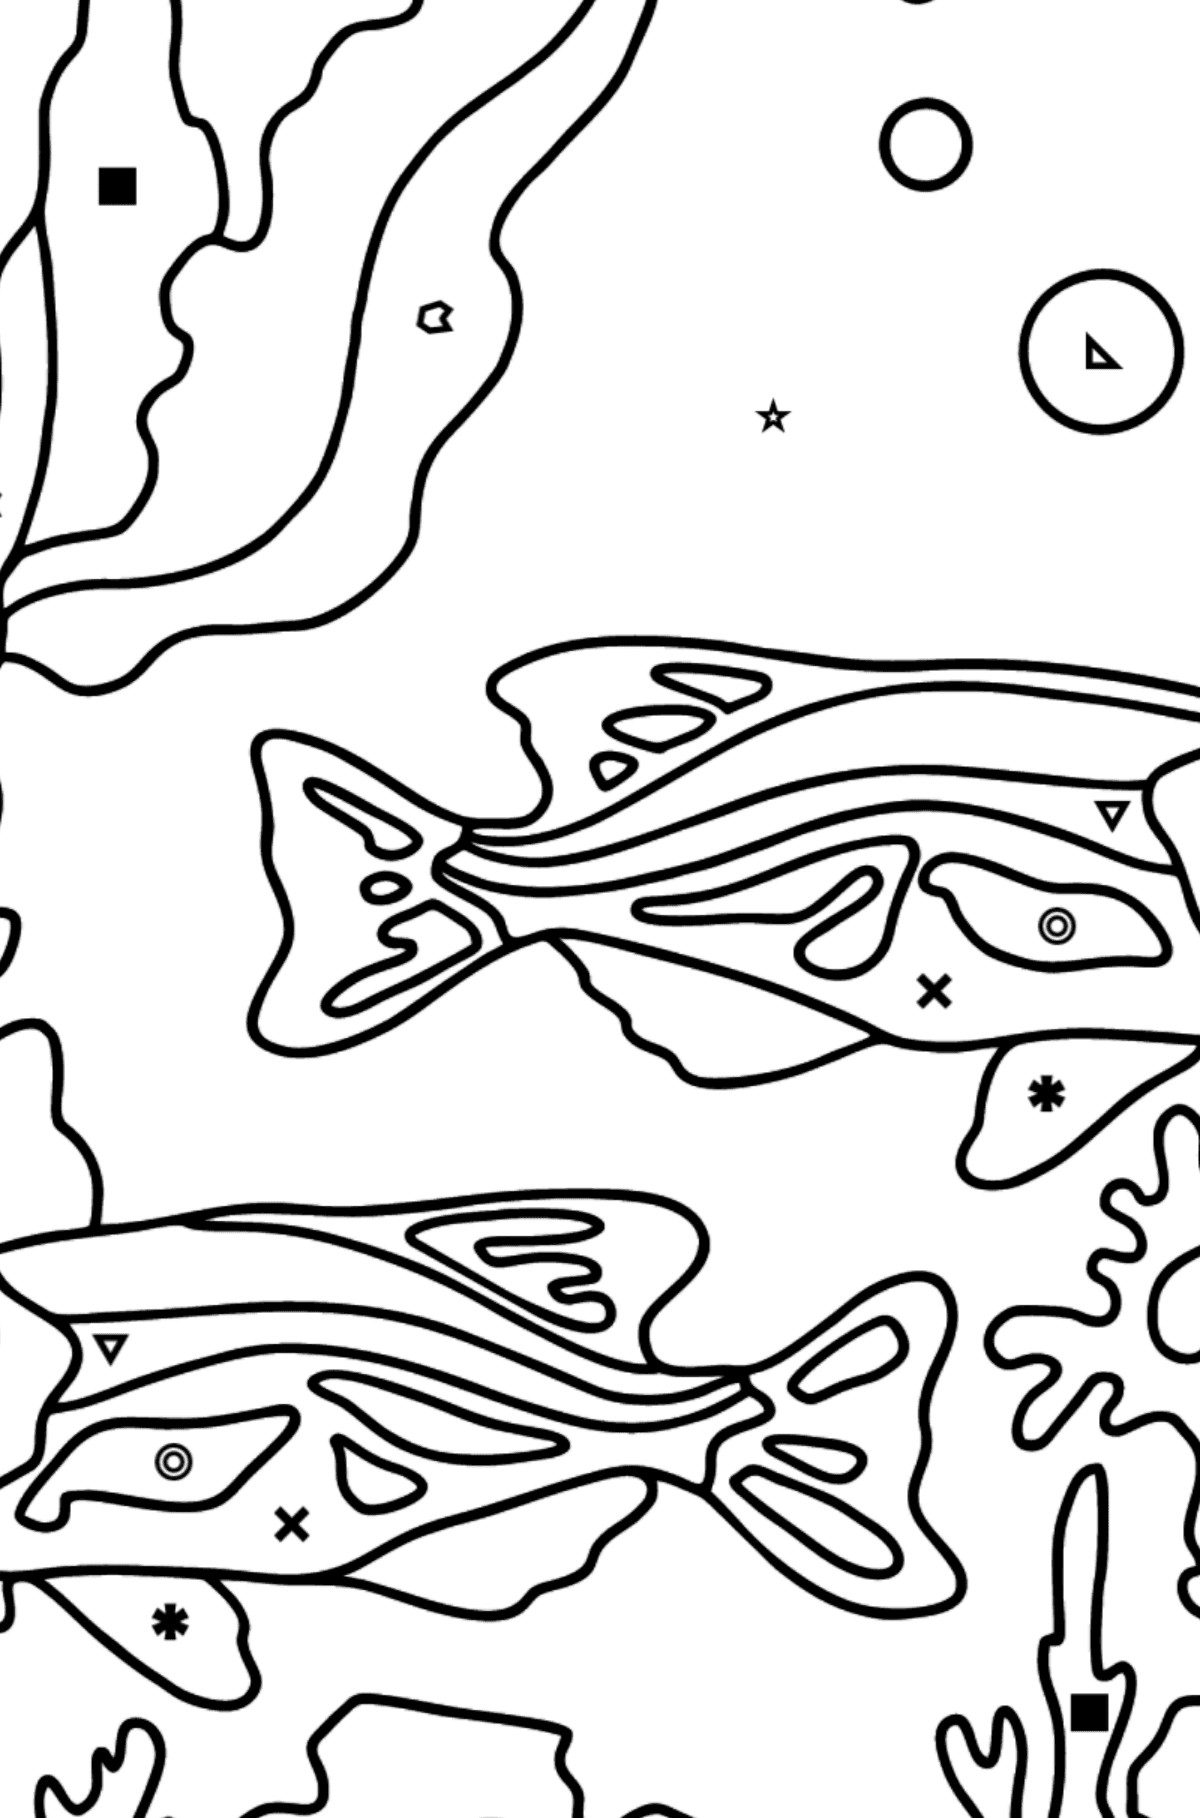 Coloring Page - Fish are Swimming Together Peacefully - Coloring by Symbols and Geometric Shapes for Kids